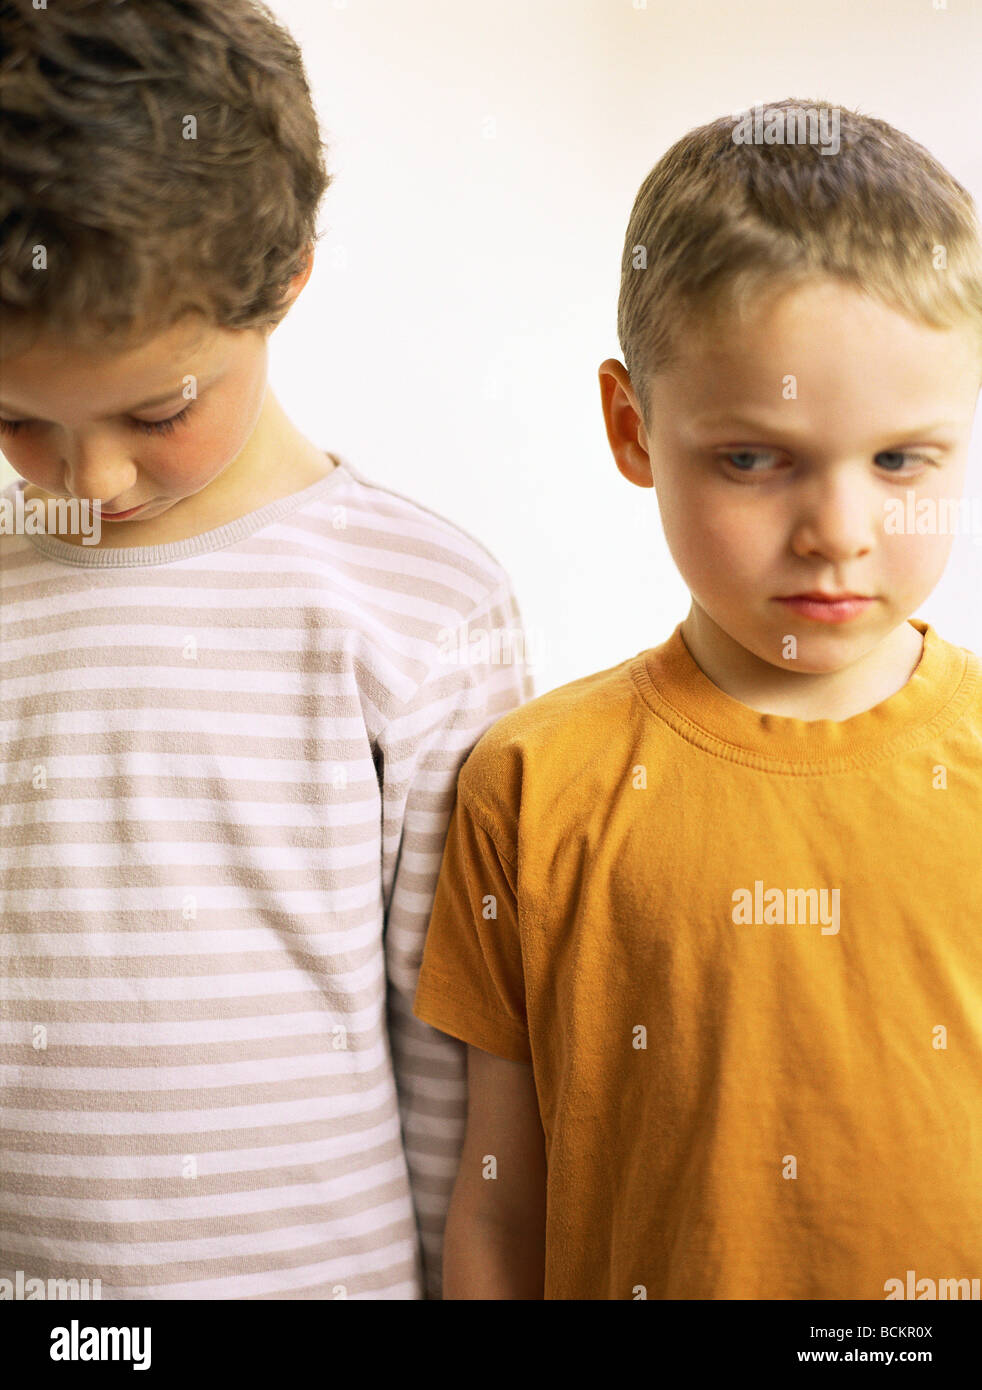 Two children standing side by side Stock Photo